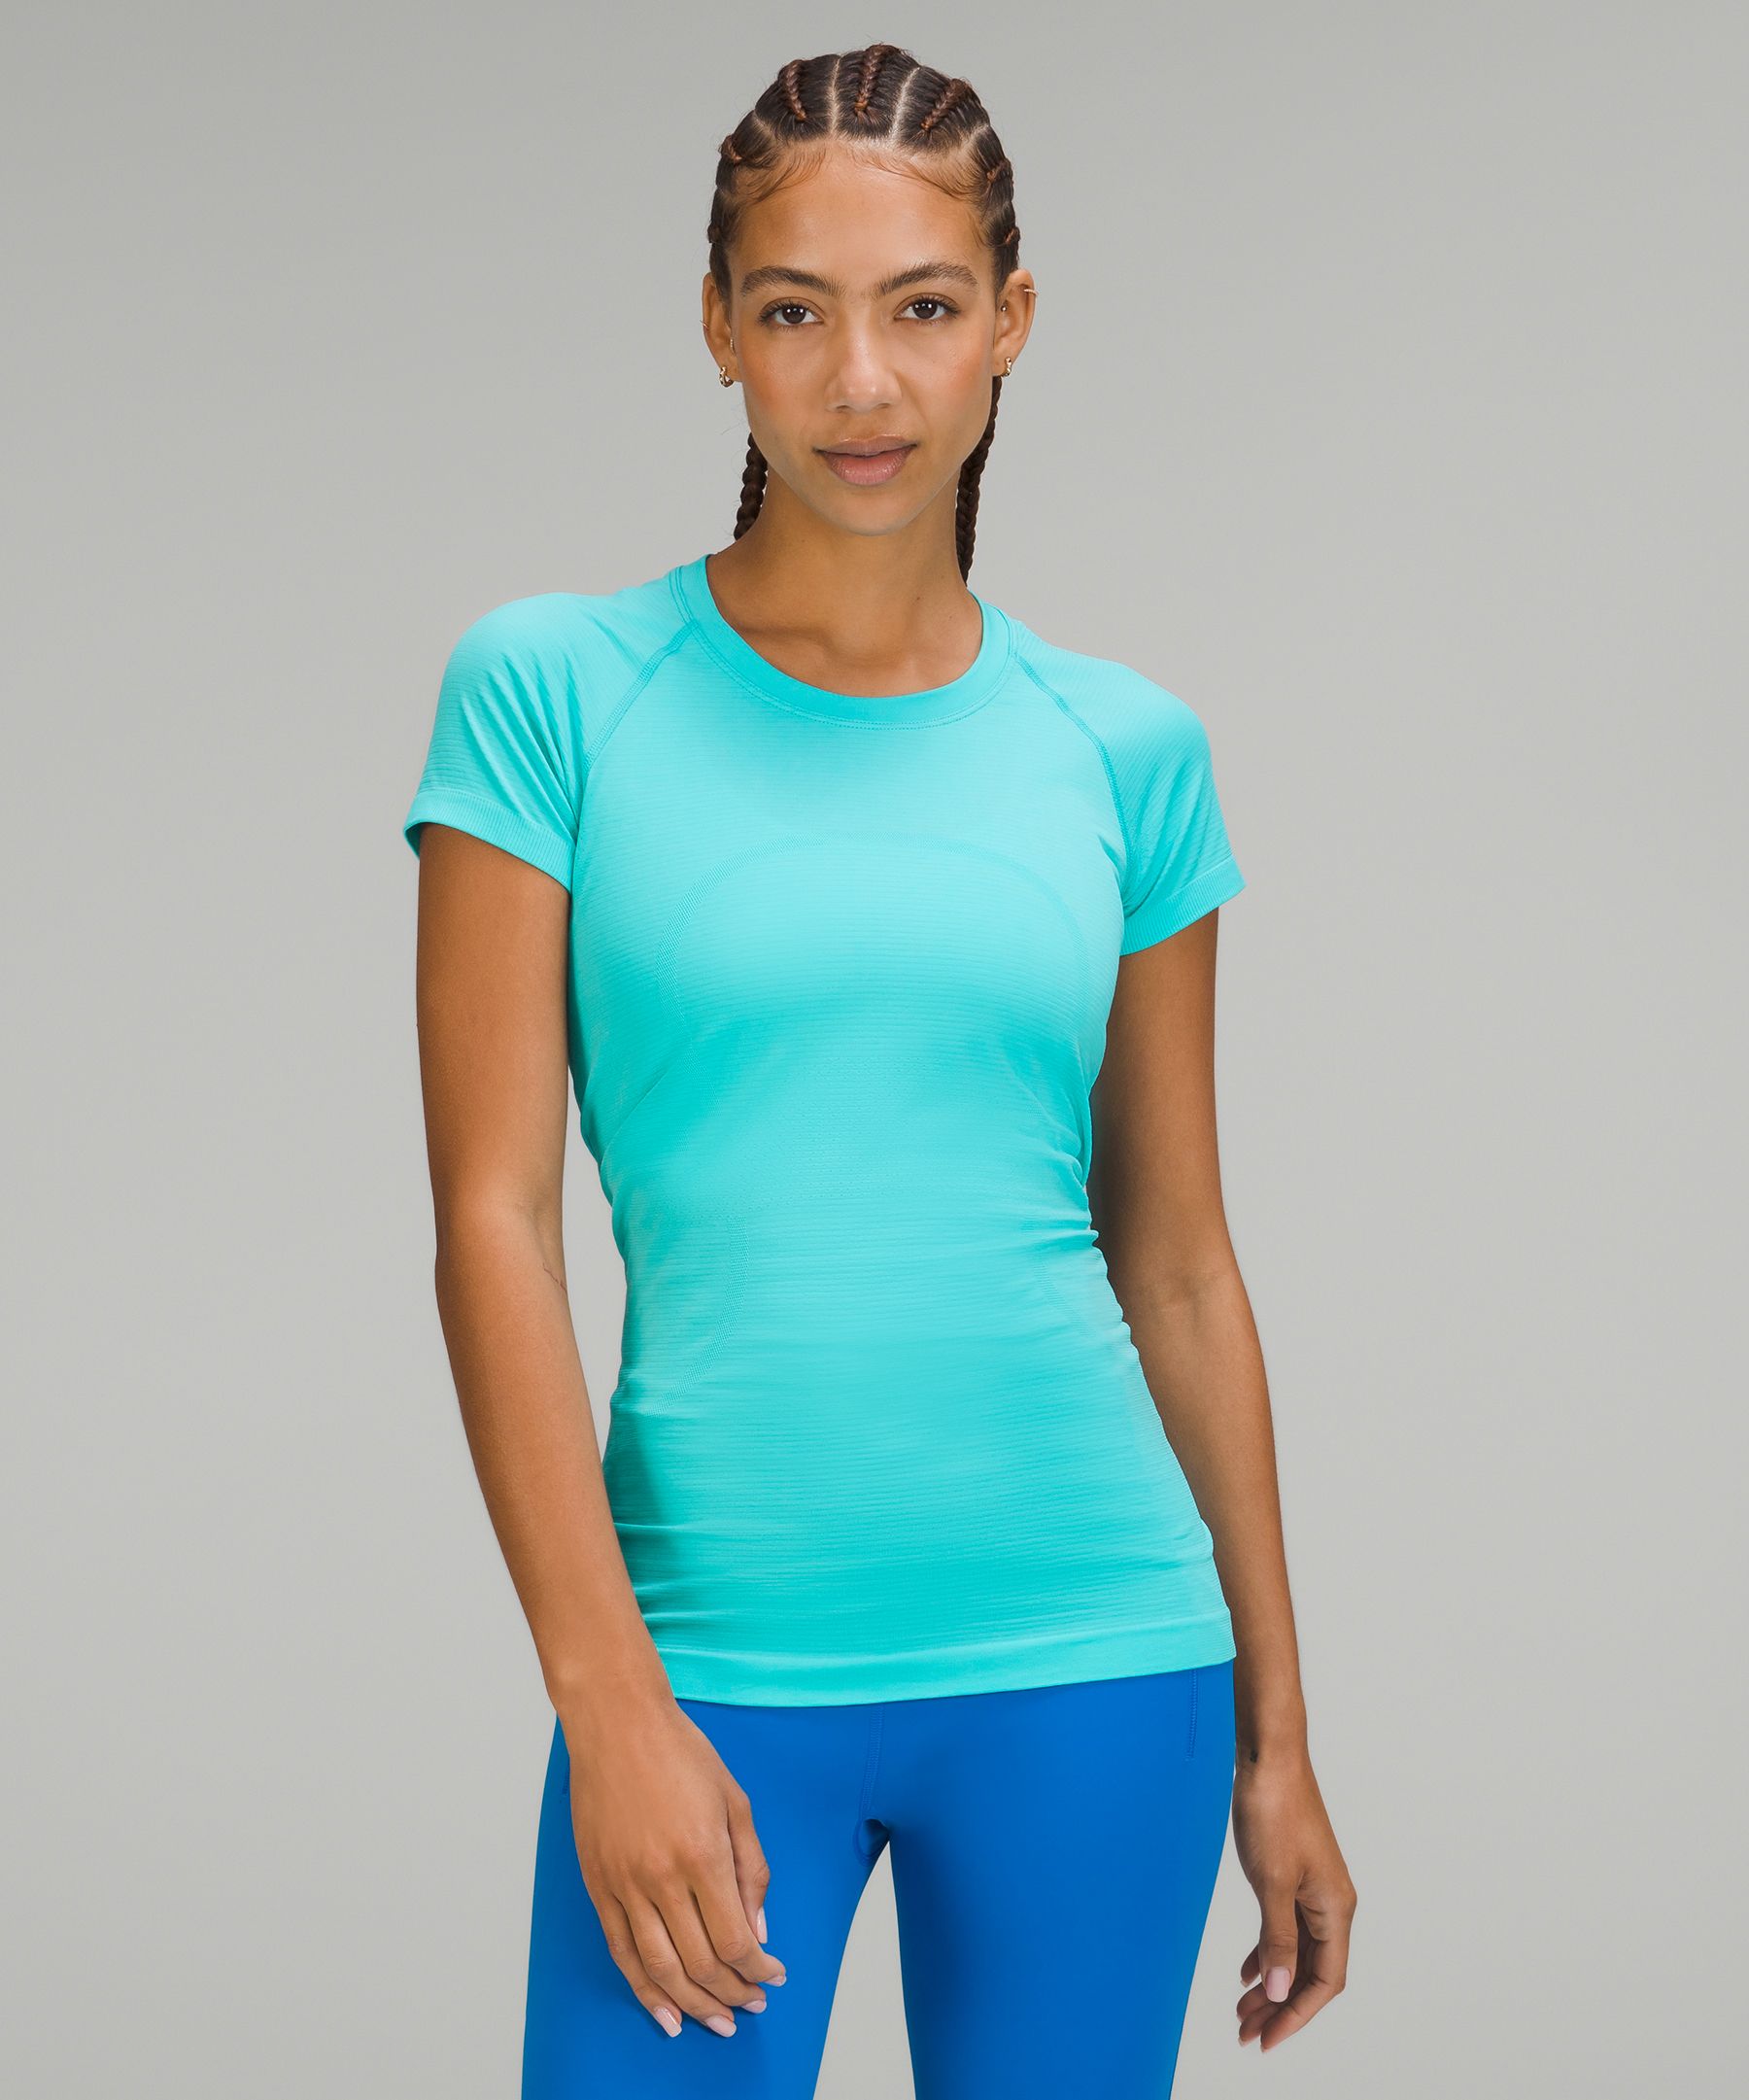 Lululemon Swiftly Tech Short Sleeve Shirt 2.0 In Electric Turquoise/electric Turquoise